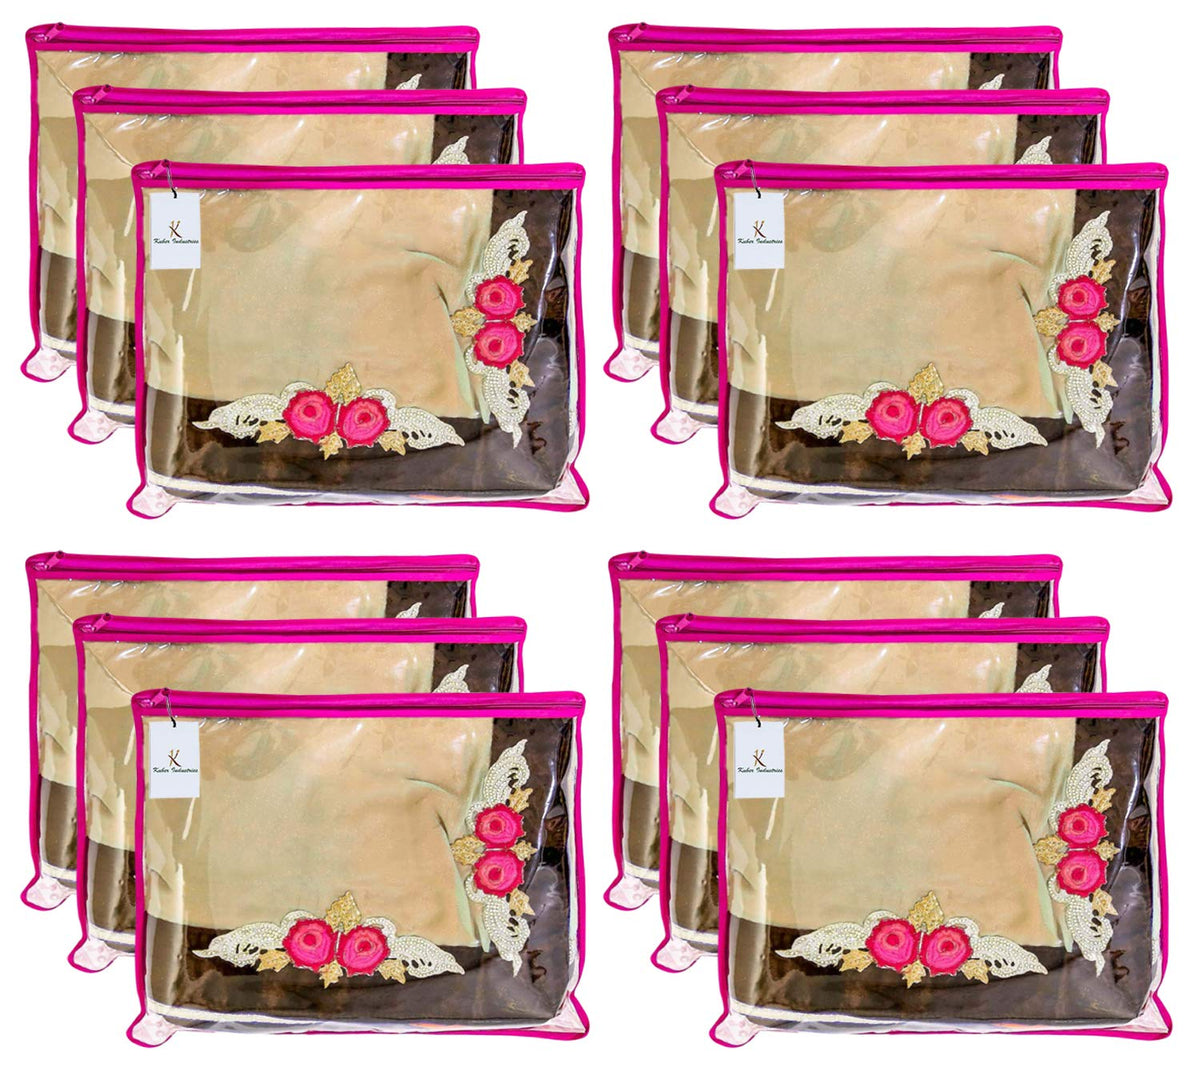 Kuber Industries Single Saree Covers With Zip|Saree Packing Covers For Wedding|Saree Cover Set Of 12 (Pink)